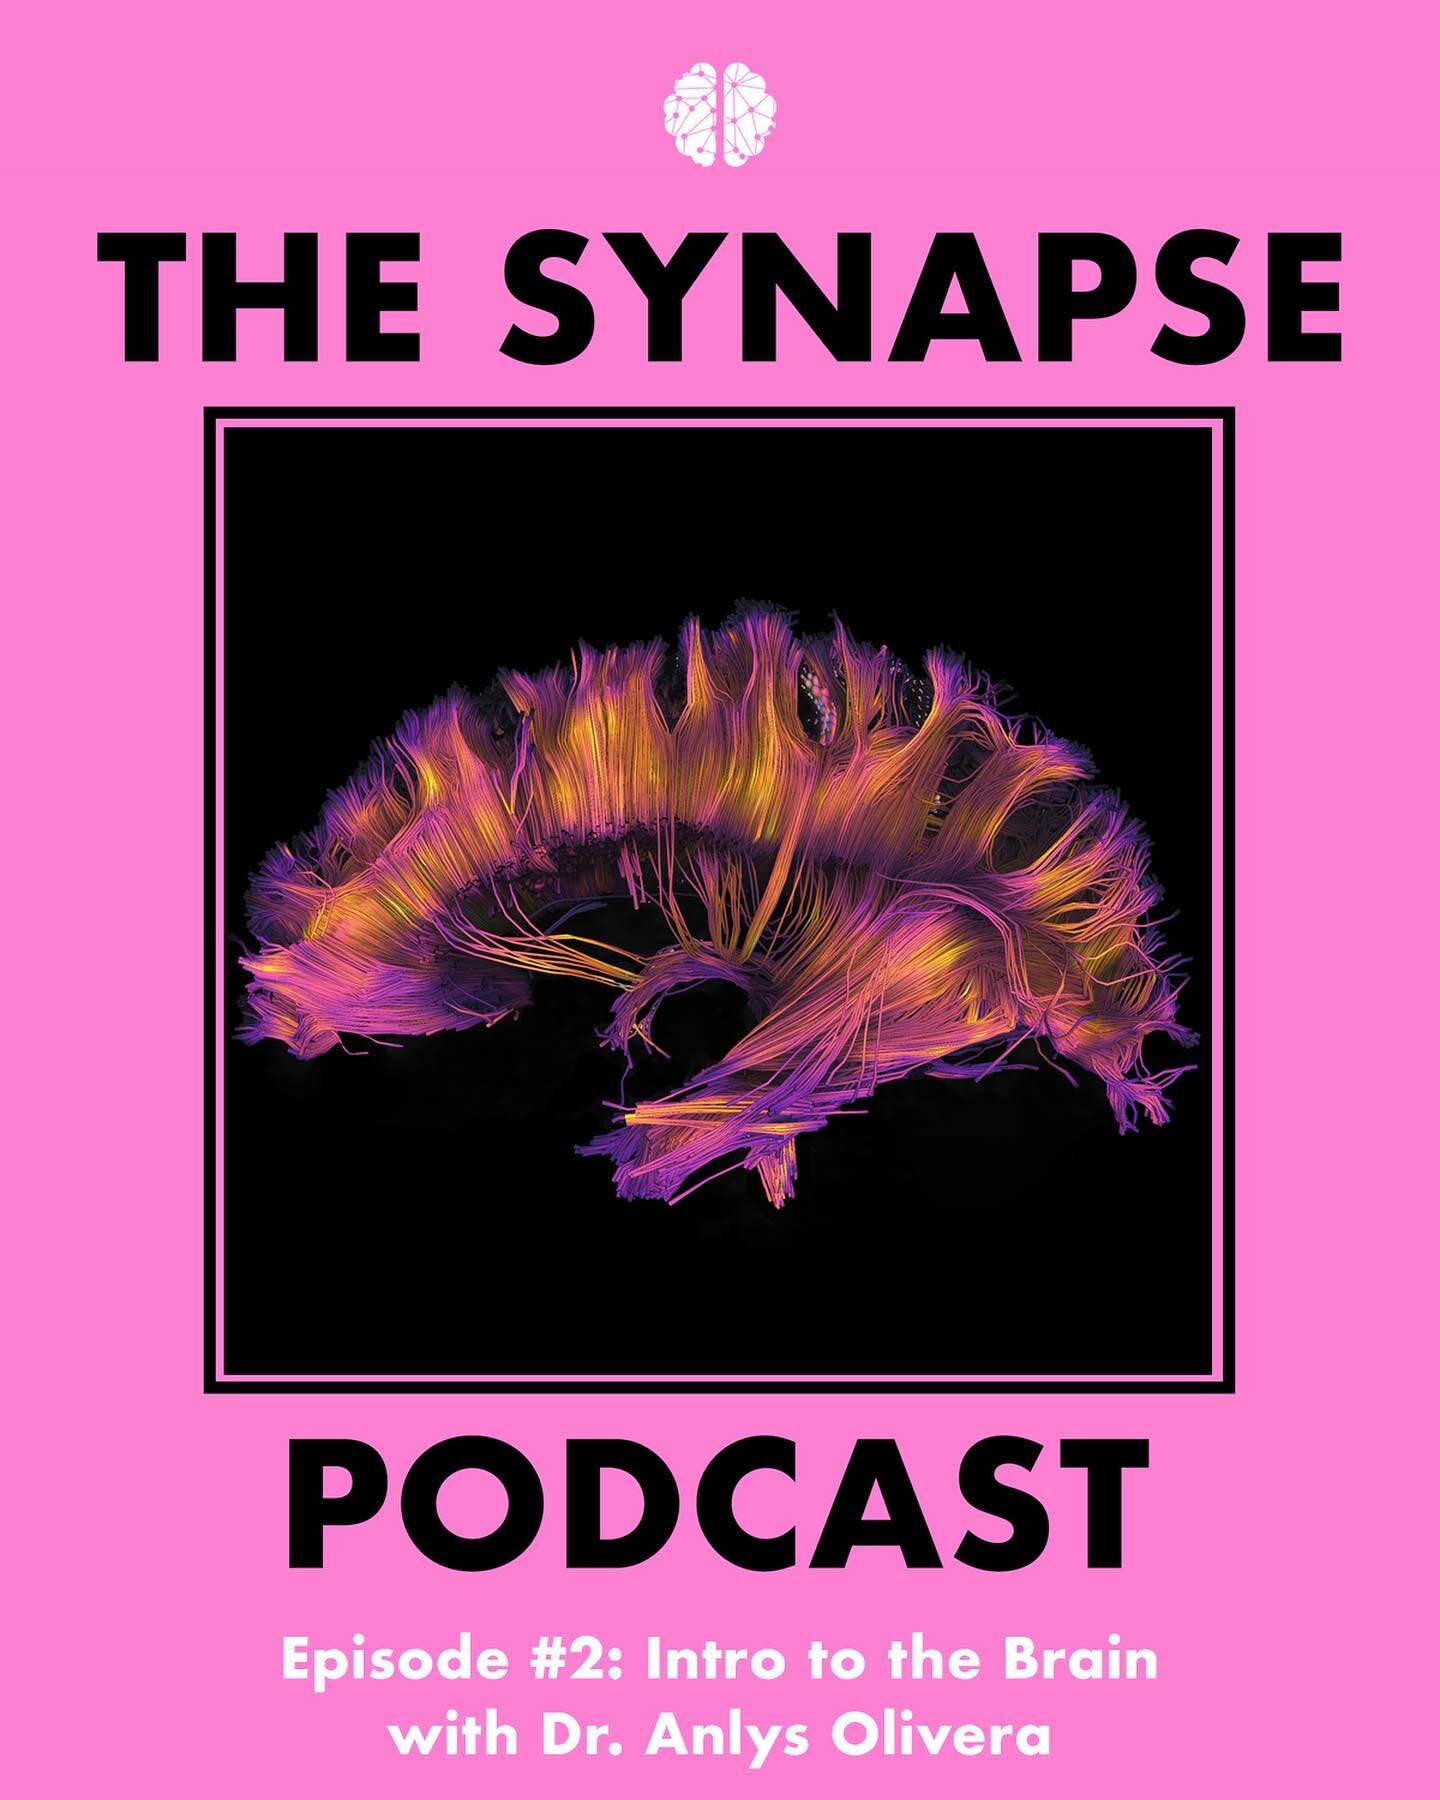 Episode #2 of THE SYNAPSE NYC PODCAST is now live! Intro to the Brain 🧠 LINK IN BIO

In this episode we talk about the brain, the body, and the fascinating ways they are constantly interacting. Our co-founder Liri Haram is in conversation with Dr. A